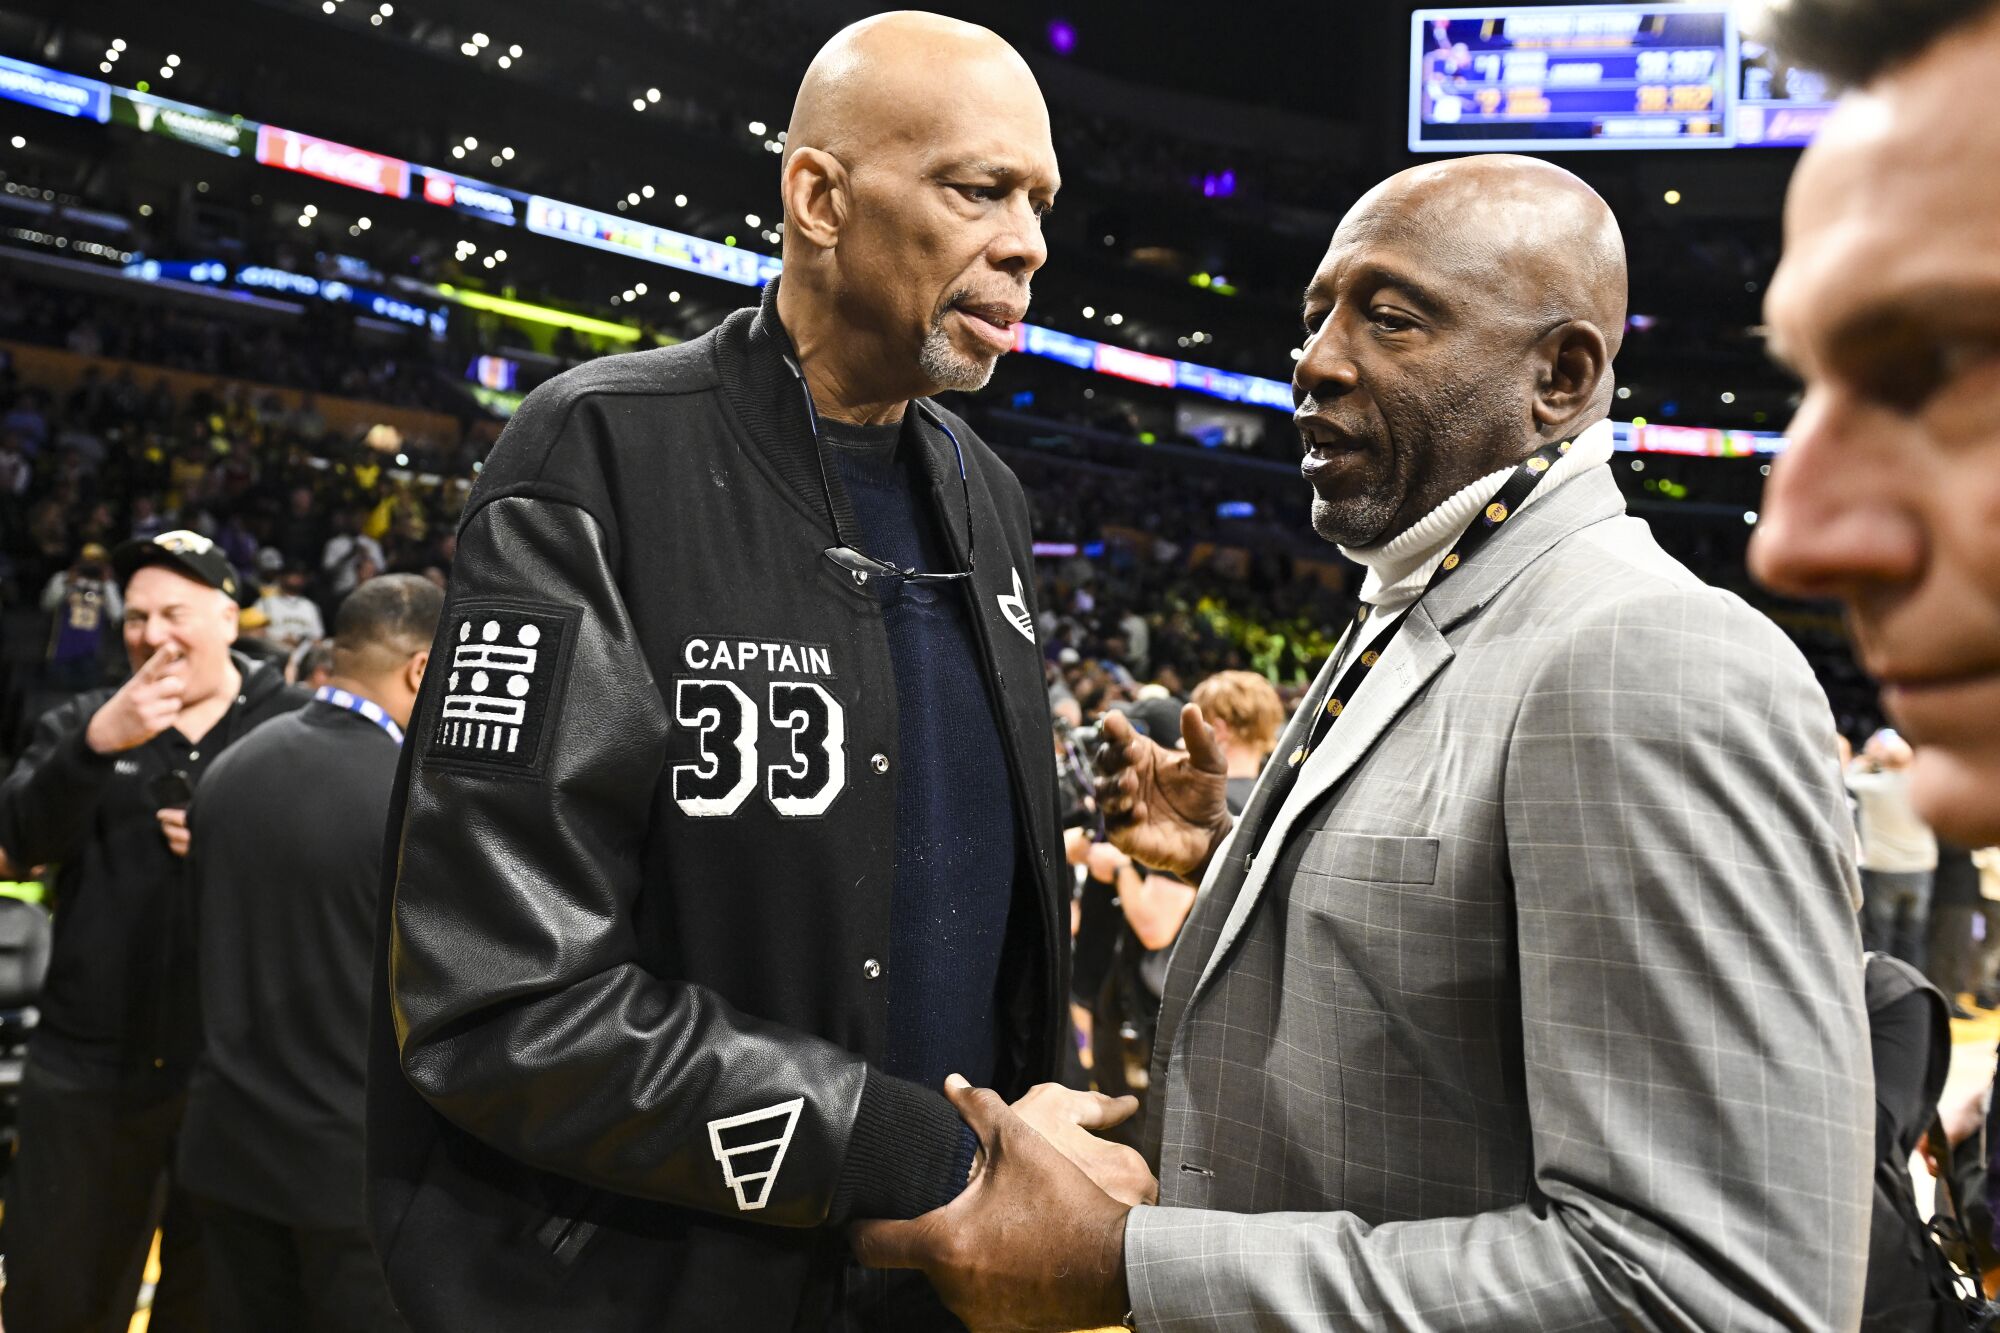 Lakers legends Kareem Abdul-Jabbar, left, and James Worthy talk before the game.